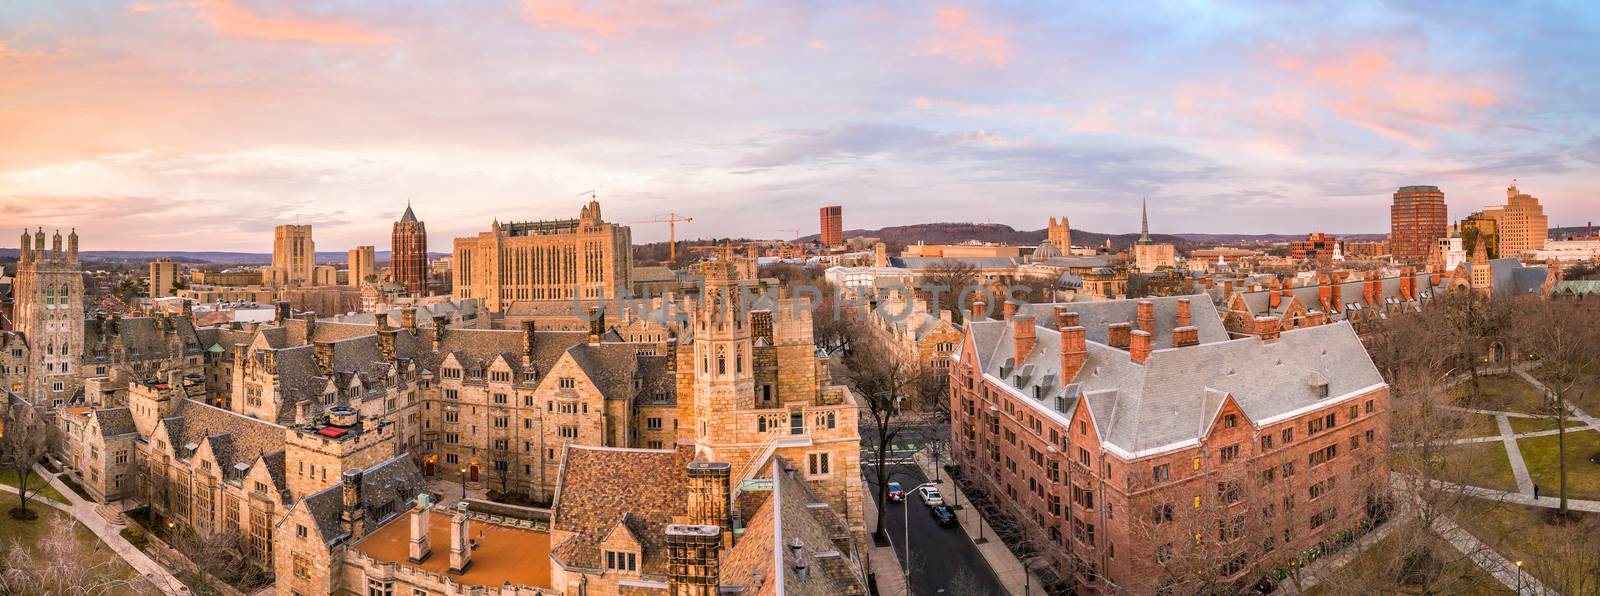 Historical building and Yale university campus in downtown New Haven CT, USA